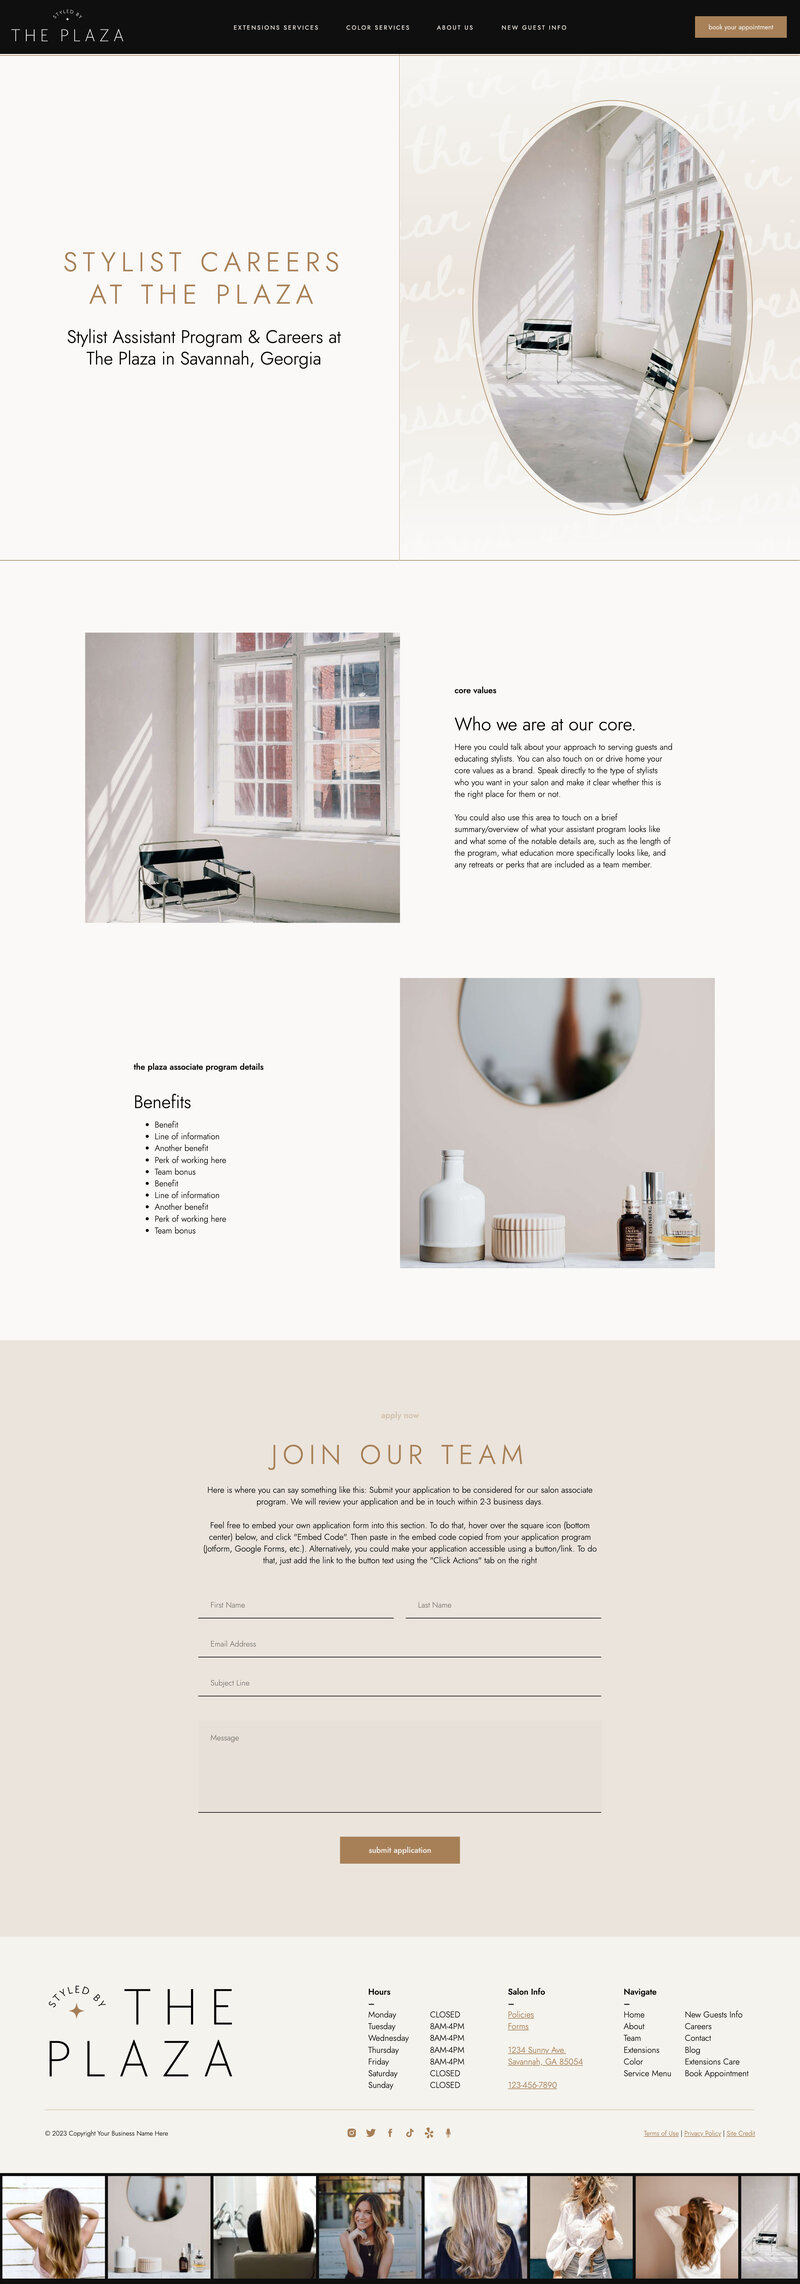 website-template-for-hair-stylists-salons-the-plaza-careers-2023-03-30-13_16_27